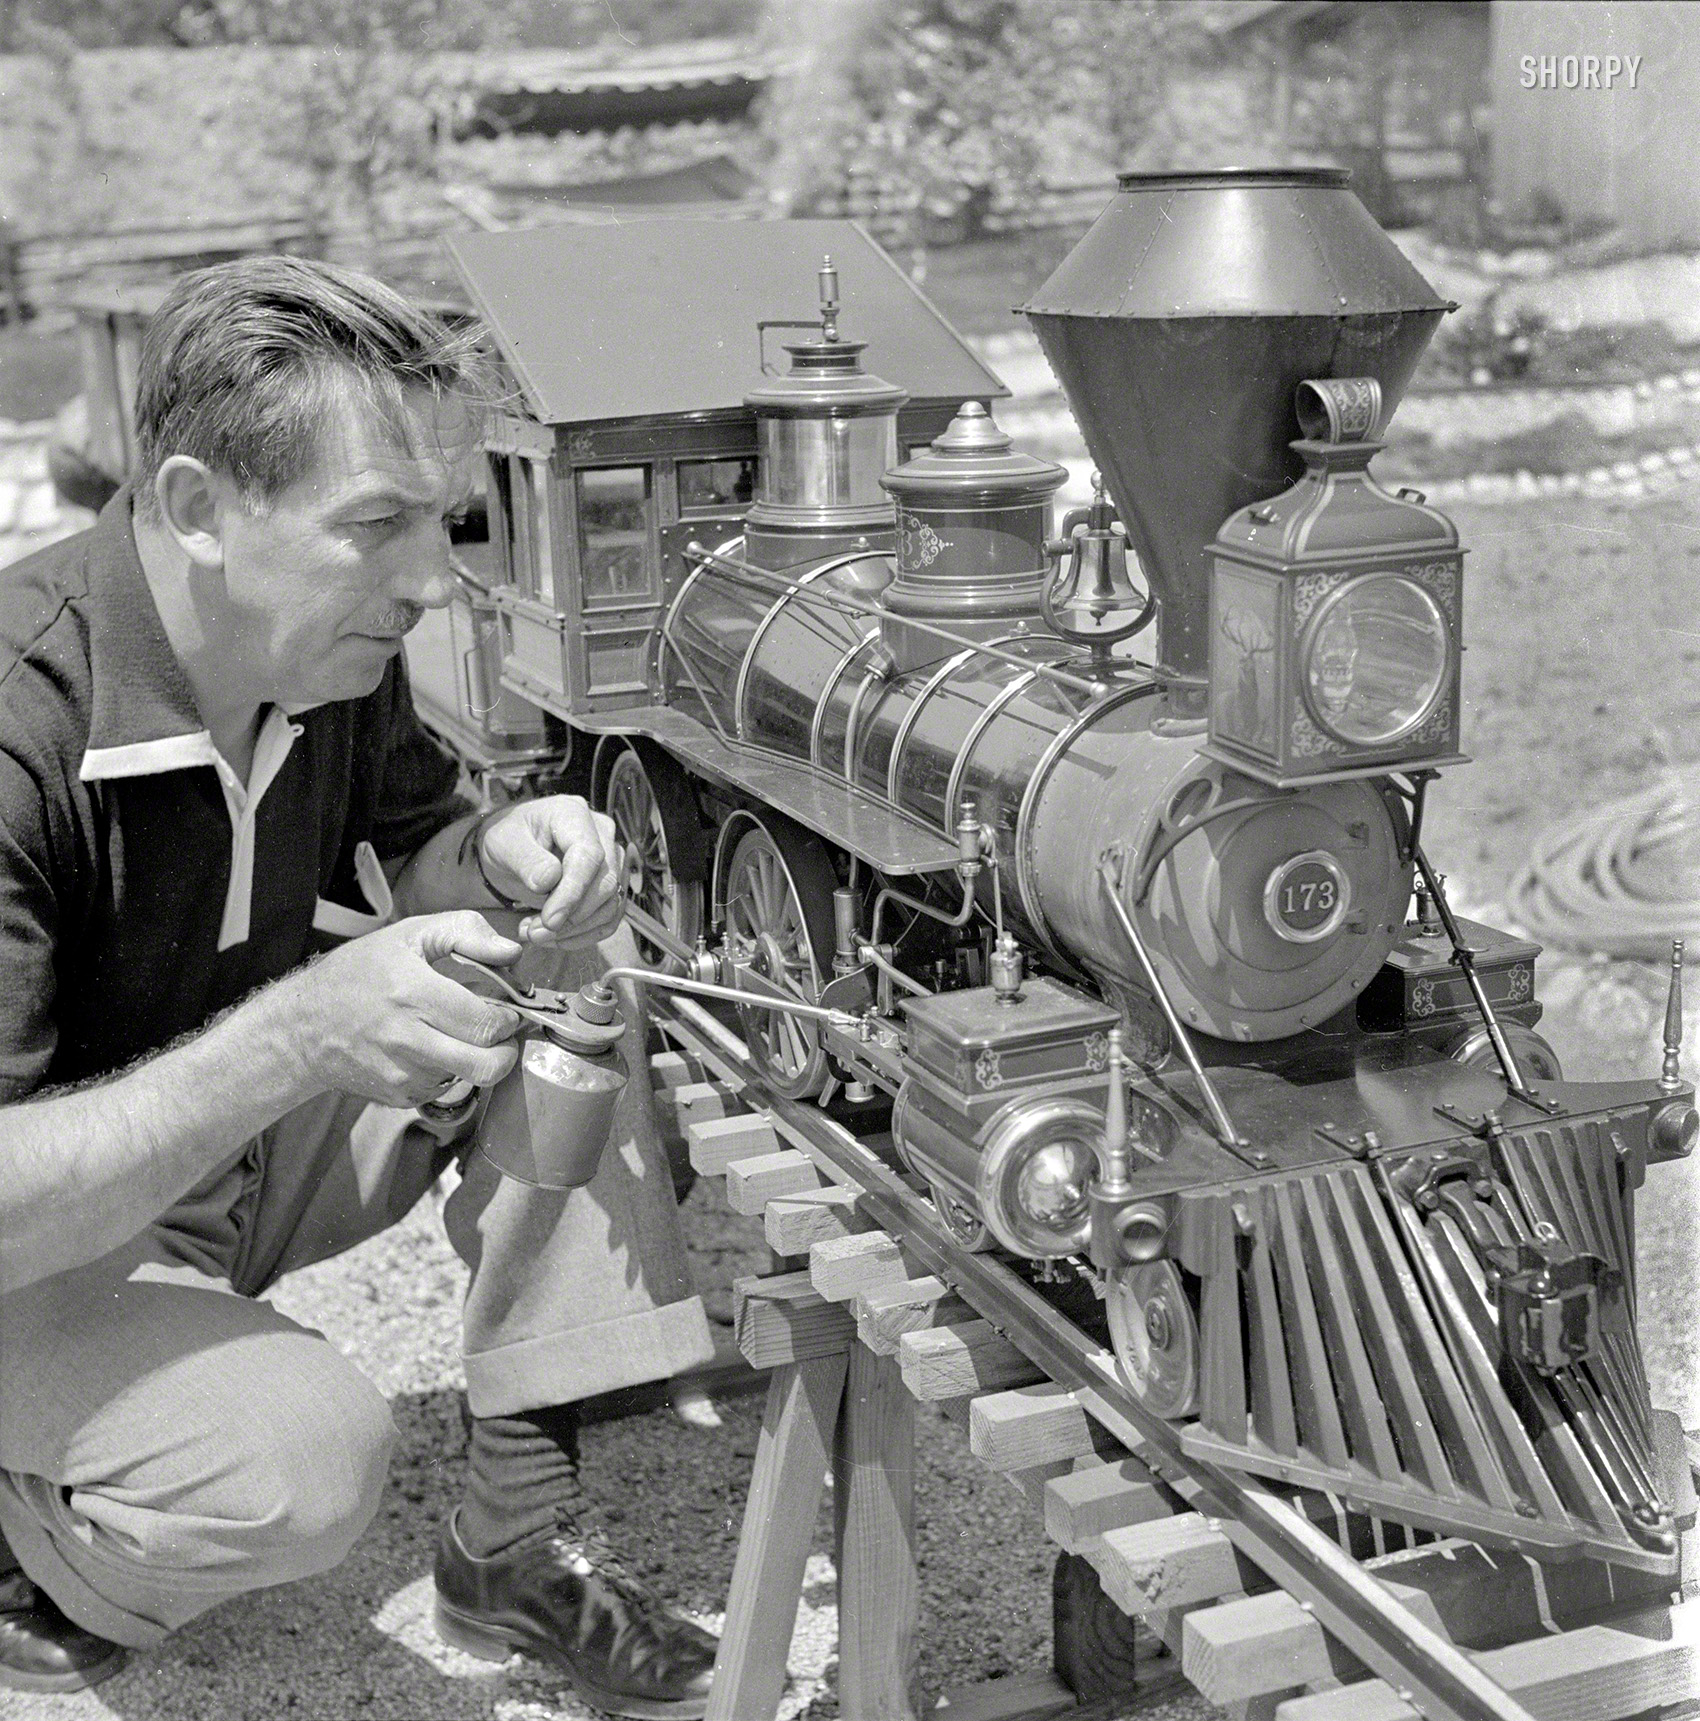 September 1951. "Walt Disney oiling parts of the locomotive of his scale model steam railroad, the Carolwood Pacific Railway, in the backyard of his house in Los Angeles." Medium-format nitrate negative by Earl Theisen for the Look magazine assignment "Walt Disney's Giant Little Railroad." View full size.